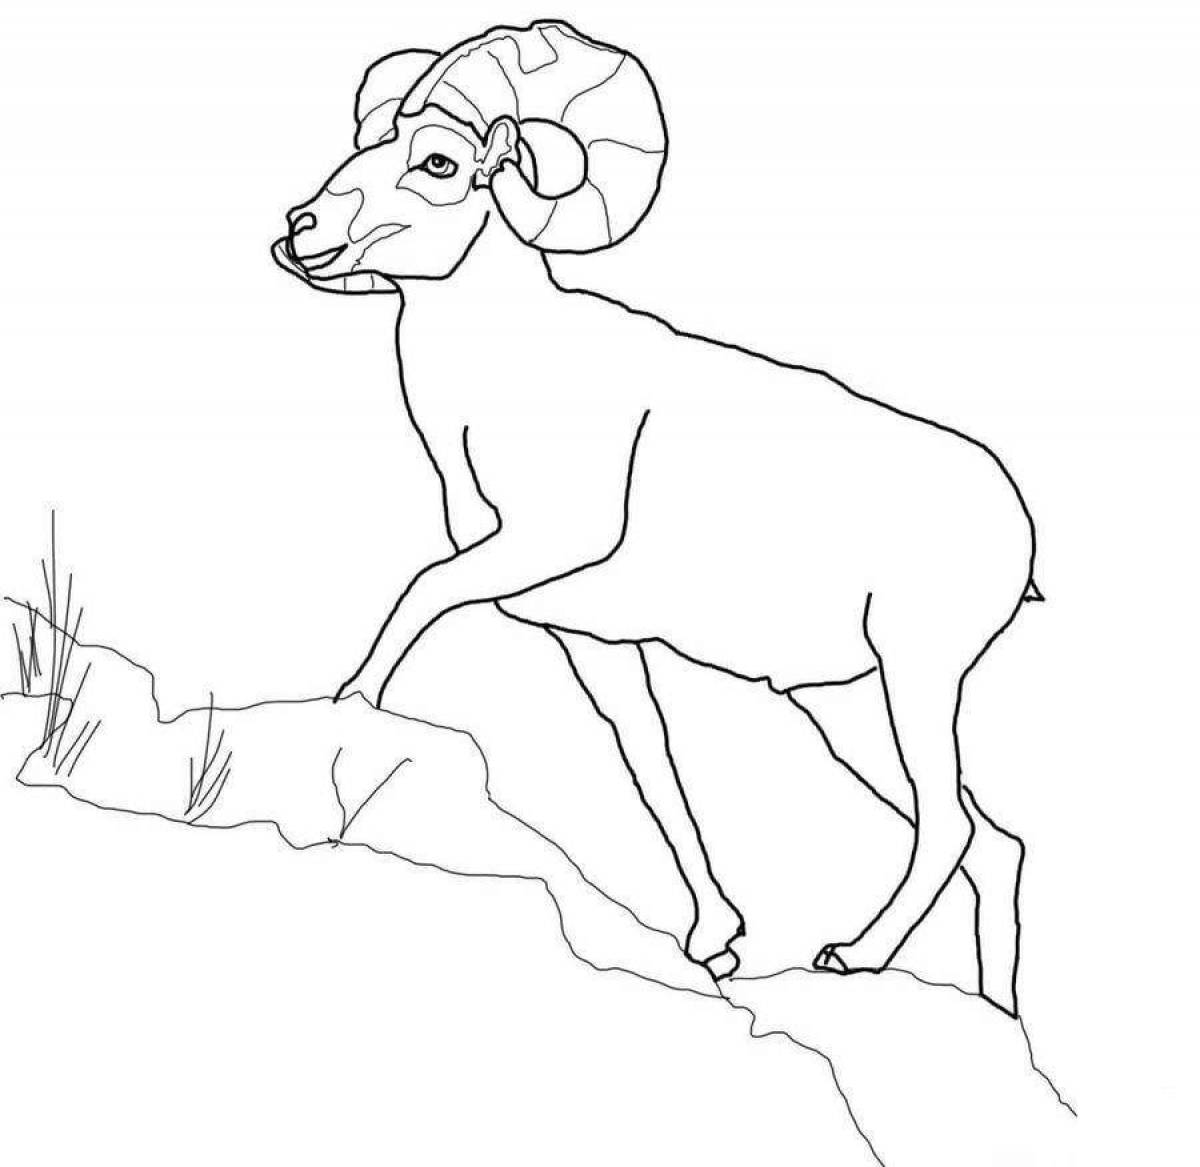 Sweet Altai mountain sheep coloring page